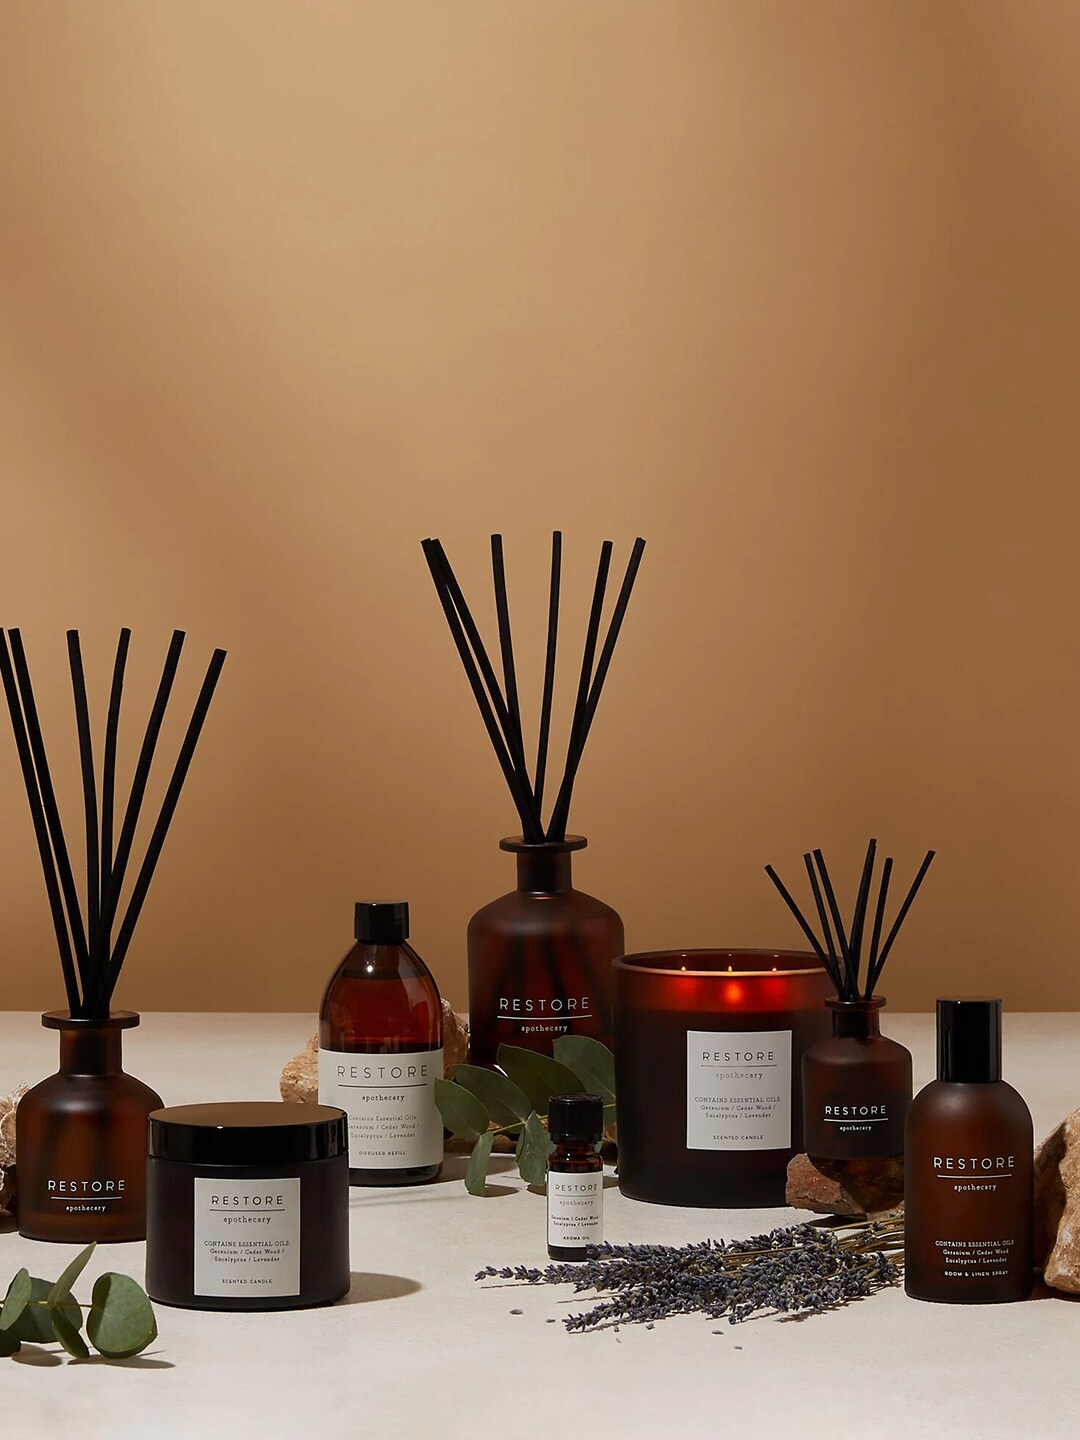 Marks & Spencer Restore Lavender & Eucalyptus Apothecary Sented Diffuser Price in India